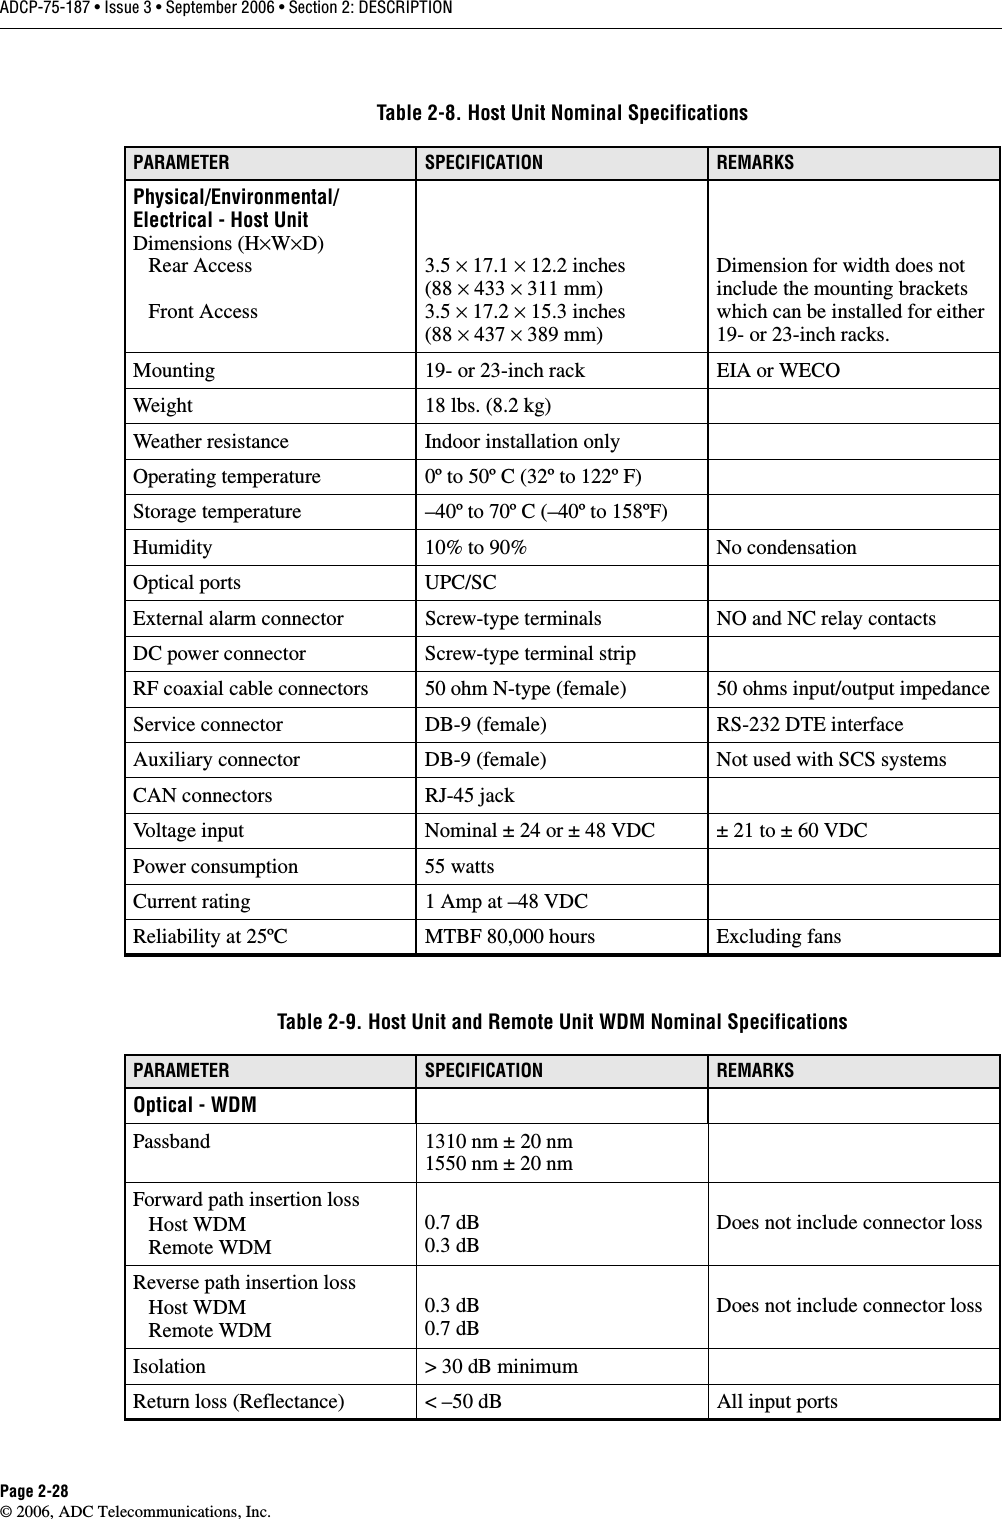 ADCP-75-187 • Issue 3 • September 2006 • Section 2: DESCRIPTIONPage 2-28© 2006, ADC Telecommunications, Inc.Table 2-8. Host Unit Nominal SpecificationsPARAMETER SPECIFICATION REMARKSPhysical/Environmental/Electrical - Host UnitDimensions (H×W×D)   Rear Access   Front Access3.5 × 17.1 × 12.2 inches(88 × 433 × 311 mm)3.5 × 17.2 × 15.3 inches(88 × 437 × 389 mm)Dimension for width does not include the mounting brackets which can be installed for either 19- or 23-inch racks. Mounting 19- or 23-inch rack EIA or WECOWeight 18 lbs. (8.2 kg)Weather resistance Indoor installation onlyOperating temperature 0º to 50º C (32º to 122º F)Storage temperature –40º to 70º C (–40º to 158ºF)Humidity 10% to 90% No condensationOptical ports UPC/SCExternal alarm connector Screw-type terminals NO and NC relay contactsDC power connector Screw-type terminal stripRF coaxial cable connectors 50 ohm N-type (female) 50 ohms input/output impedanceService connector DB-9 (female) RS-232 DTE interfaceAuxiliary connector DB-9 (female) Not used with SCS systemsCAN connectors RJ-45 jackVoltage input Nominal ± 24 or ± 48 VDC ± 21 to ± 60 VDCPower consumption 55 wattsCurrent rating 1 Amp at –48 VDCReliability at 25ºC MTBF 80,000 hours Excluding fansTable 2-9. Host Unit and Remote Unit WDM Nominal SpecificationsPARAMETER SPECIFICATION REMARKSOptical - WDMPassband 1310 nm ± 20 nm1550 nm ± 20 nmForward path insertion loss   Host WDM   Remote WDM0.7 dB0.3 dBDoes not include connector lossReverse path insertion loss   Host WDM   Remote WDM0.3 dB0.7 dBDoes not include connector lossIsolation &gt; 30 dB minimumReturn loss (Reflectance) &lt; –50 dB All input ports